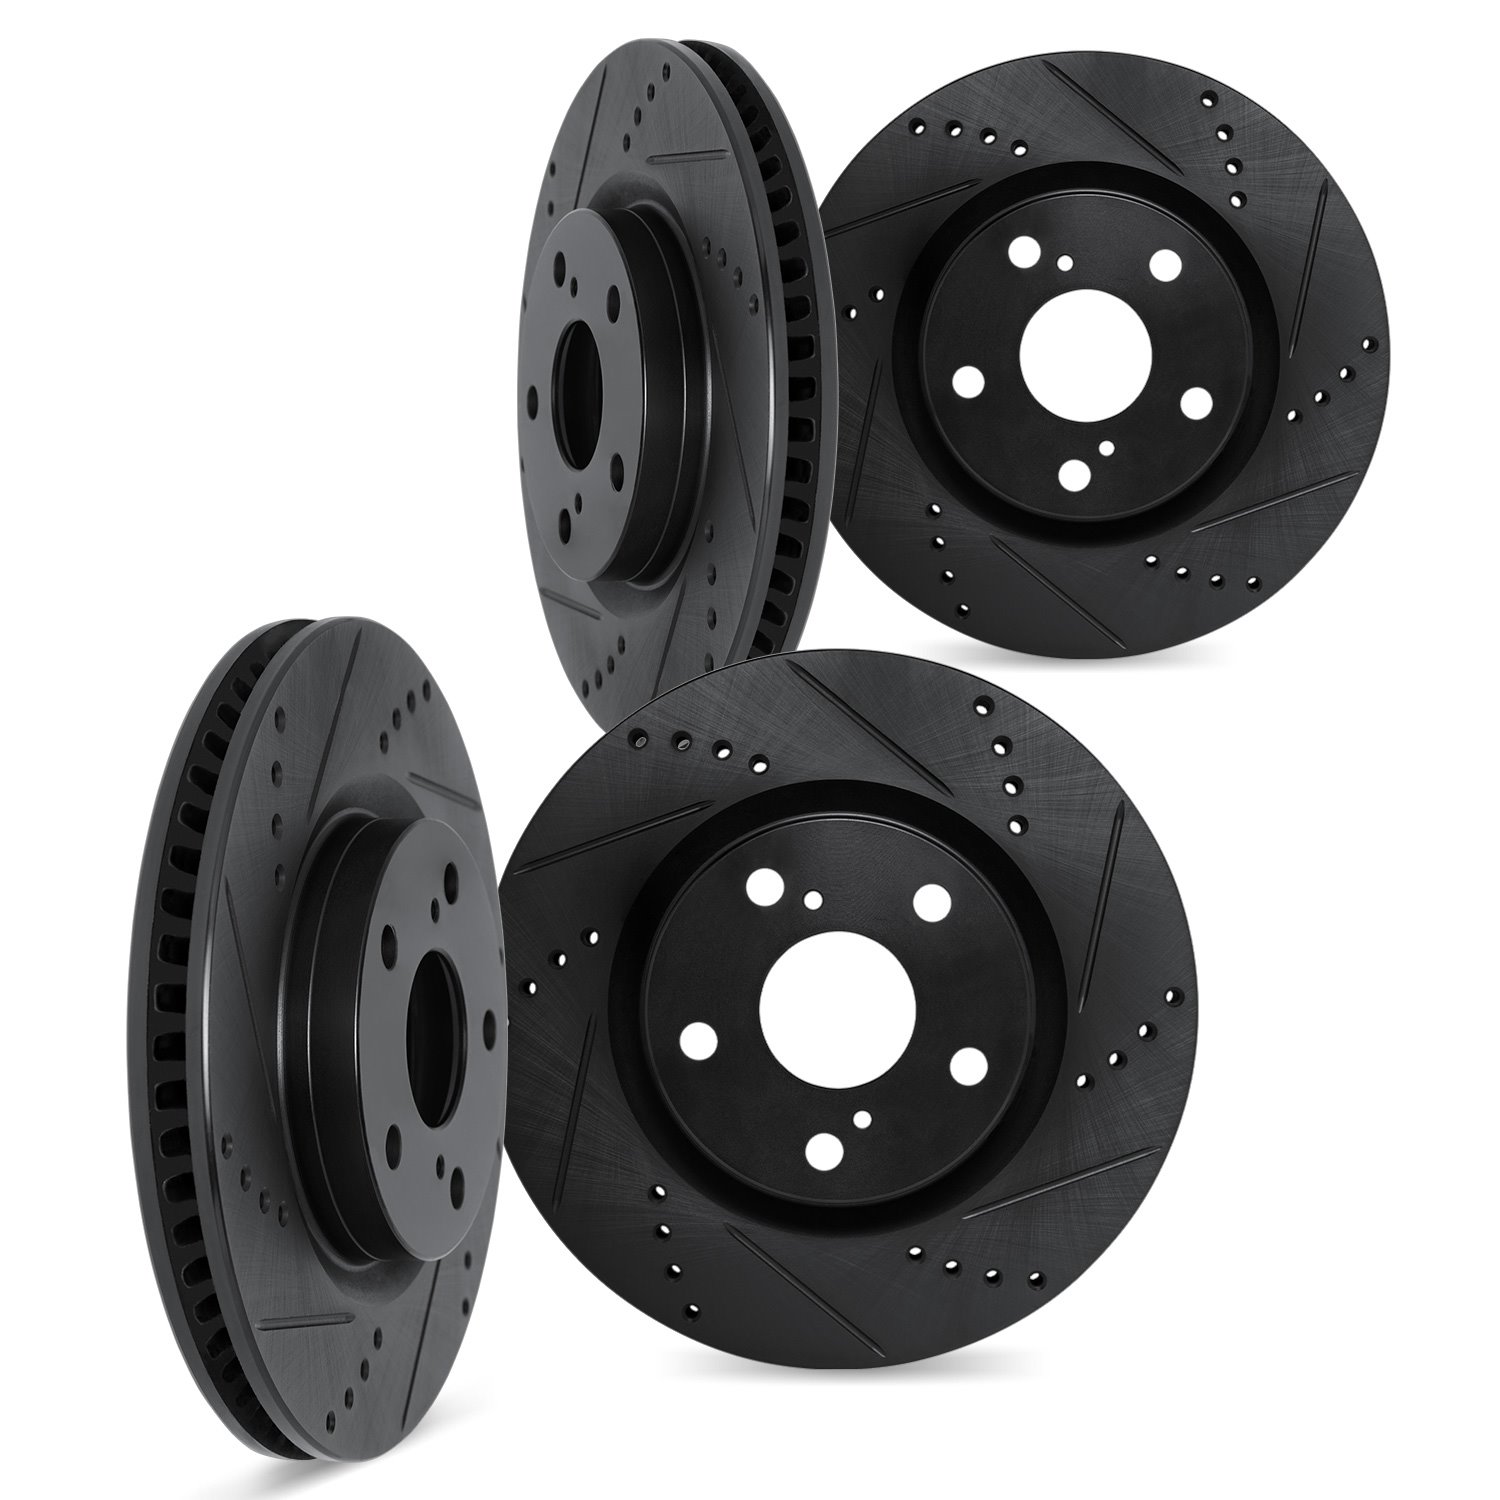 8004-13028 Drilled/Slotted Brake Rotors [Black], Fits Select Subaru, Position: Front and Rear